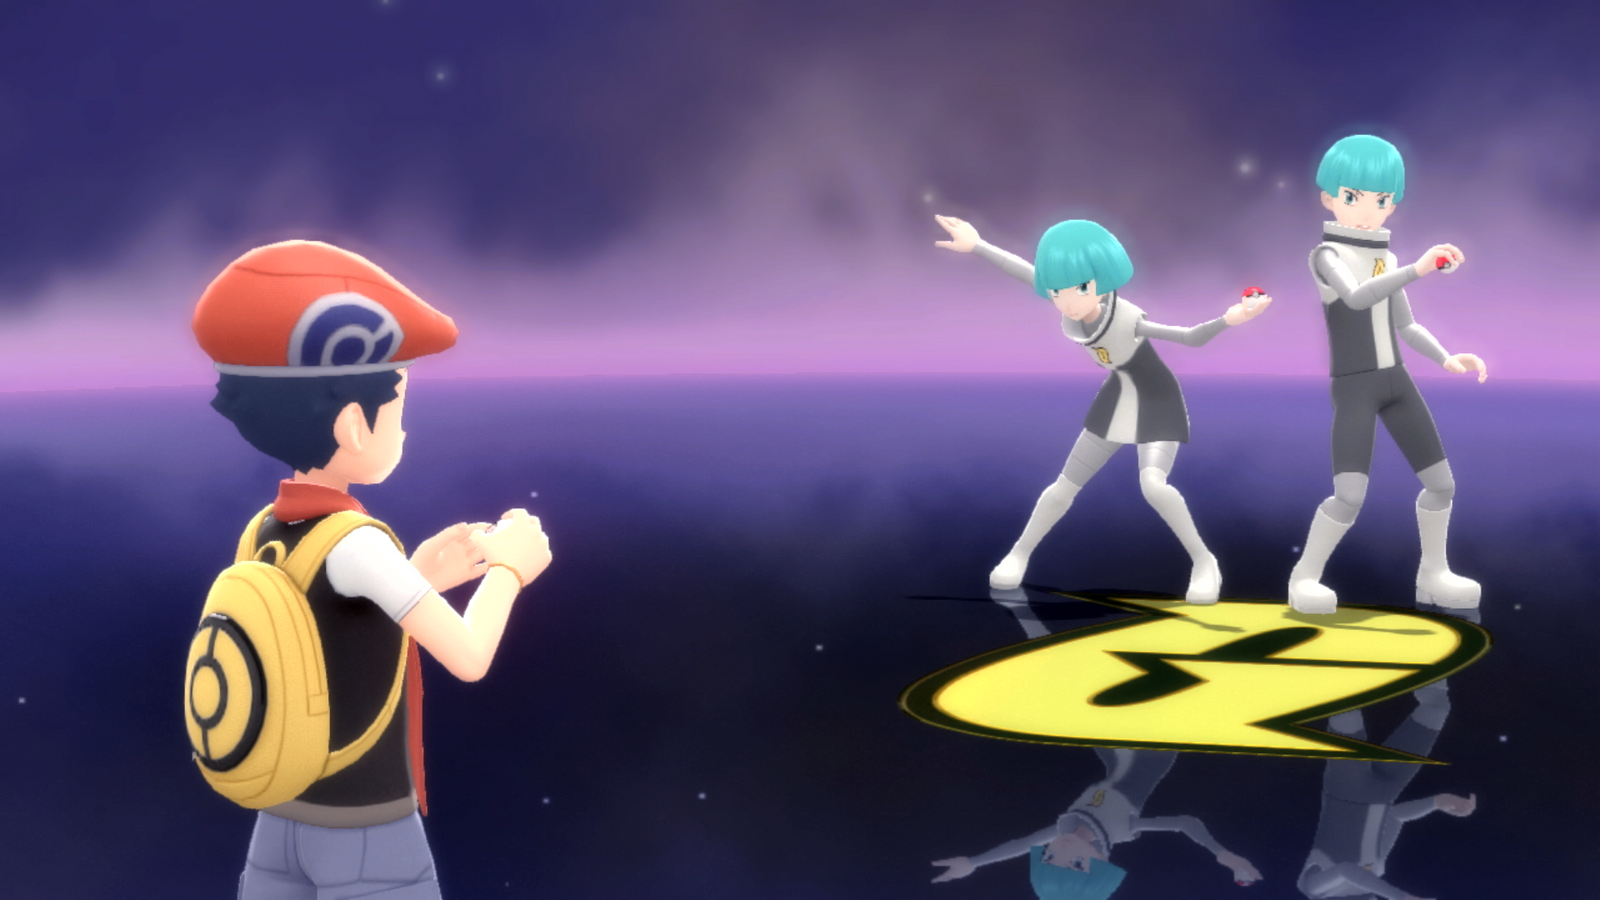 A Pokémon Trainer about to commence in battle with a duo of Team Galactic Grunts in Pokémon Brilliant Diamond and Shining Pearl.